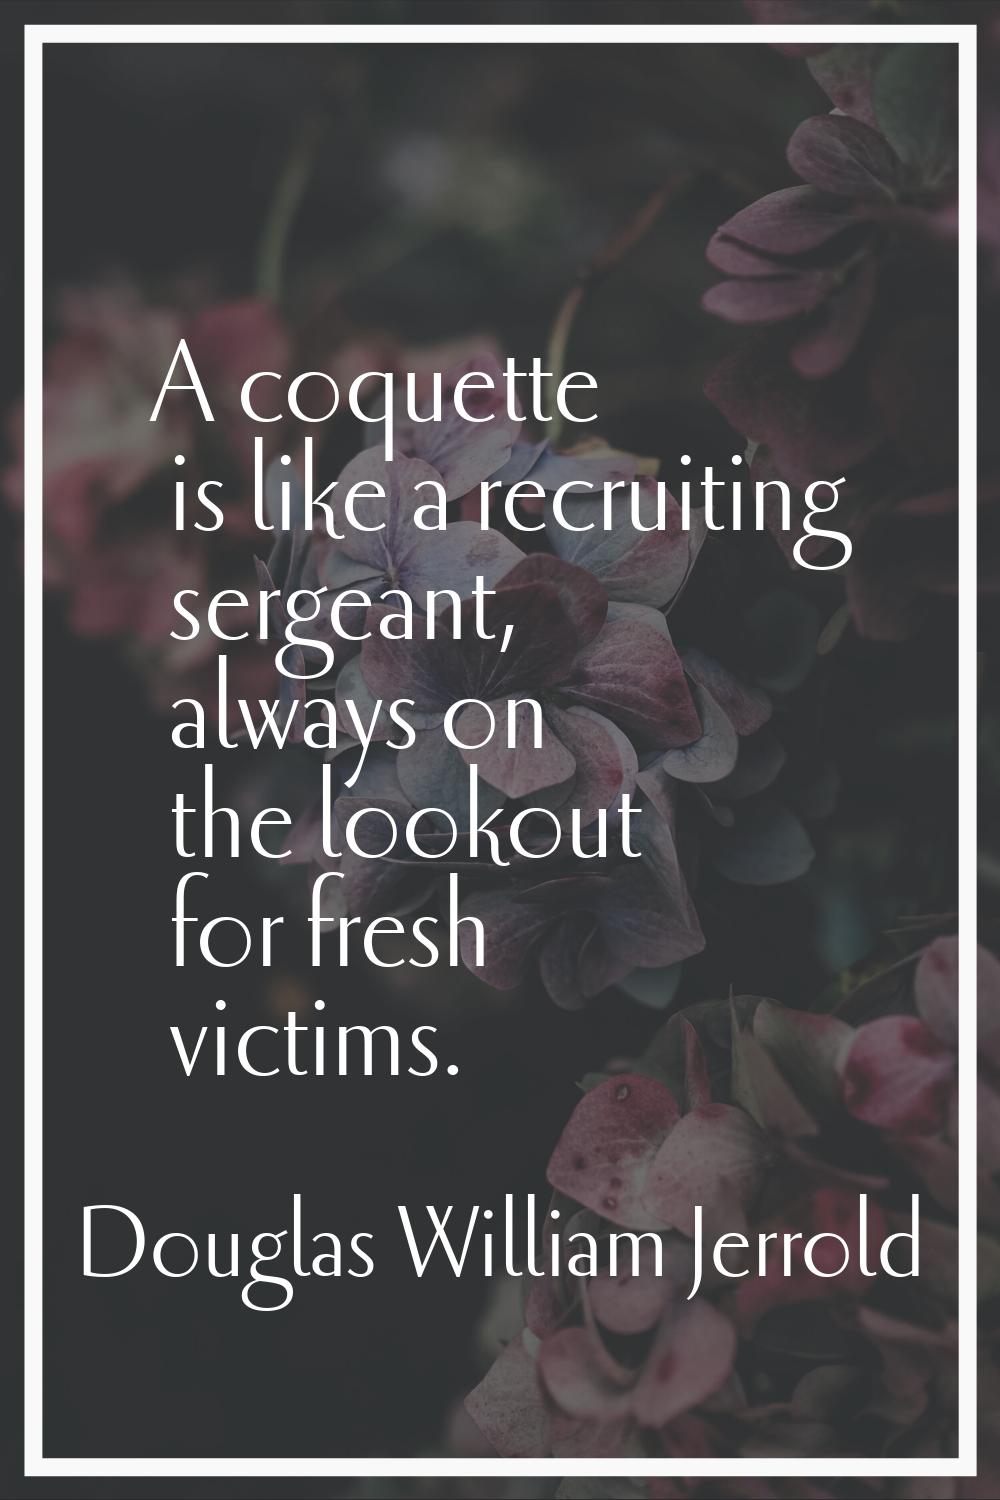 A coquette is like a recruiting sergeant, always on the lookout for fresh victims.